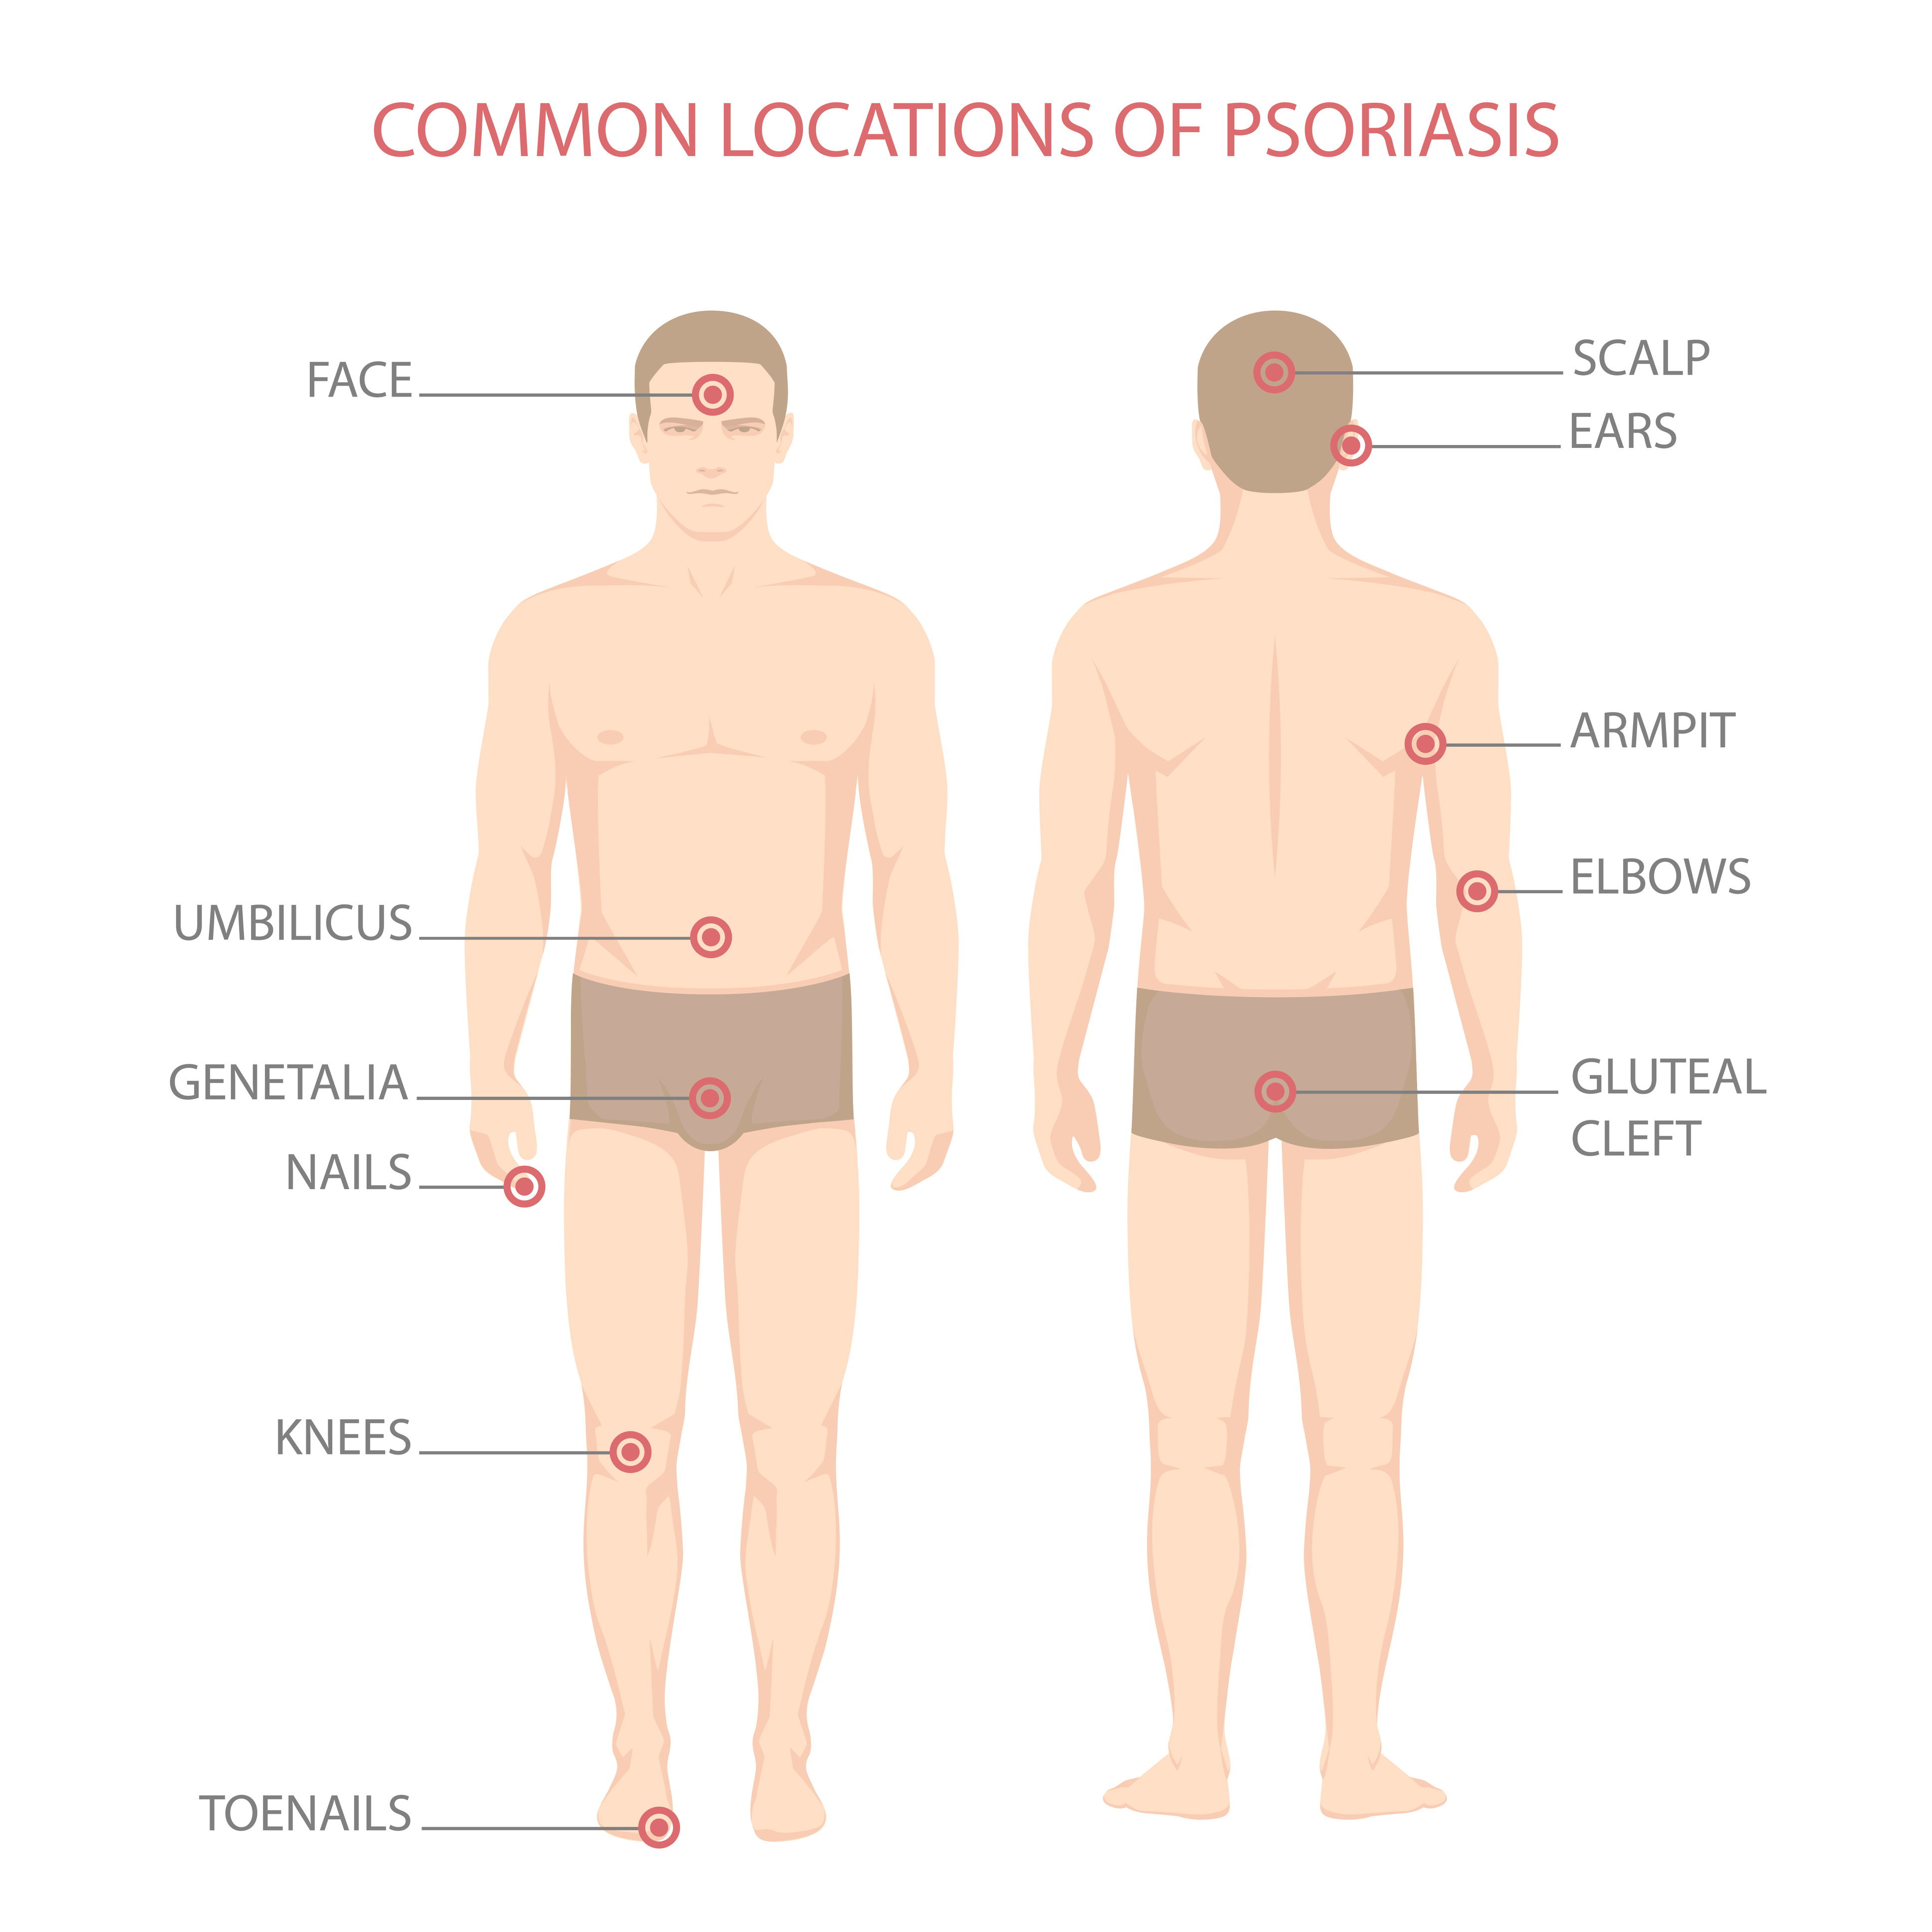 Common locations of psoriasis